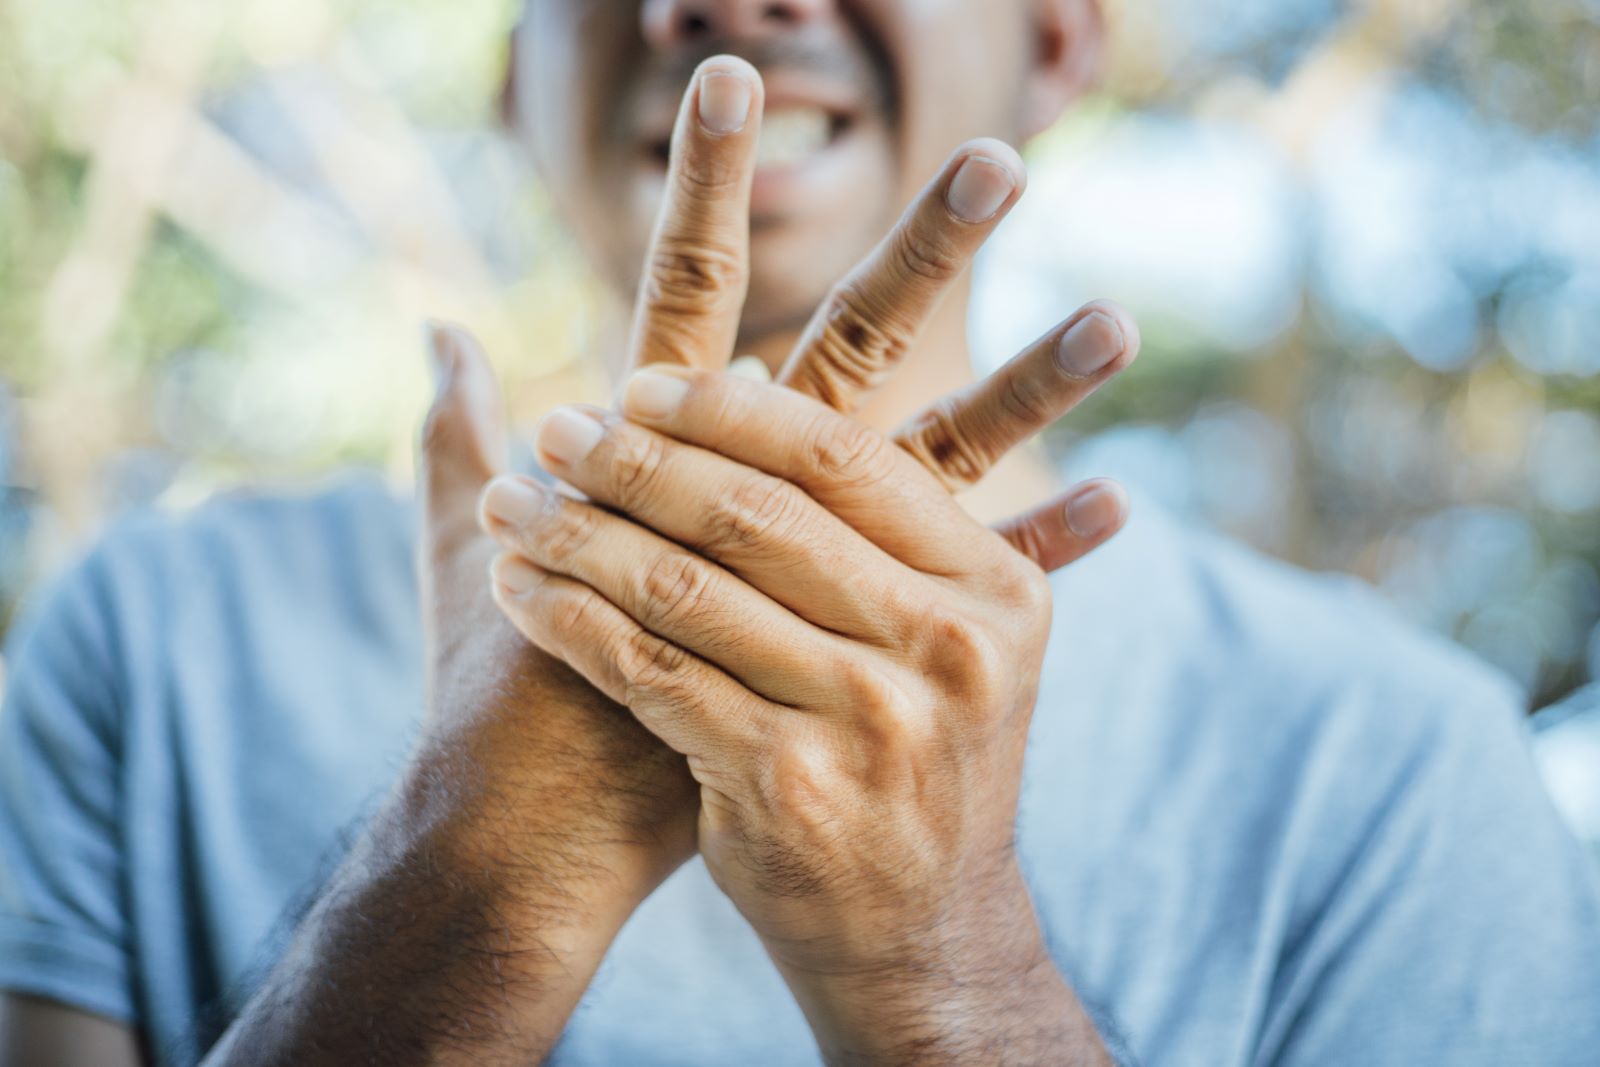 5 Surprising Signs of Neuropathy